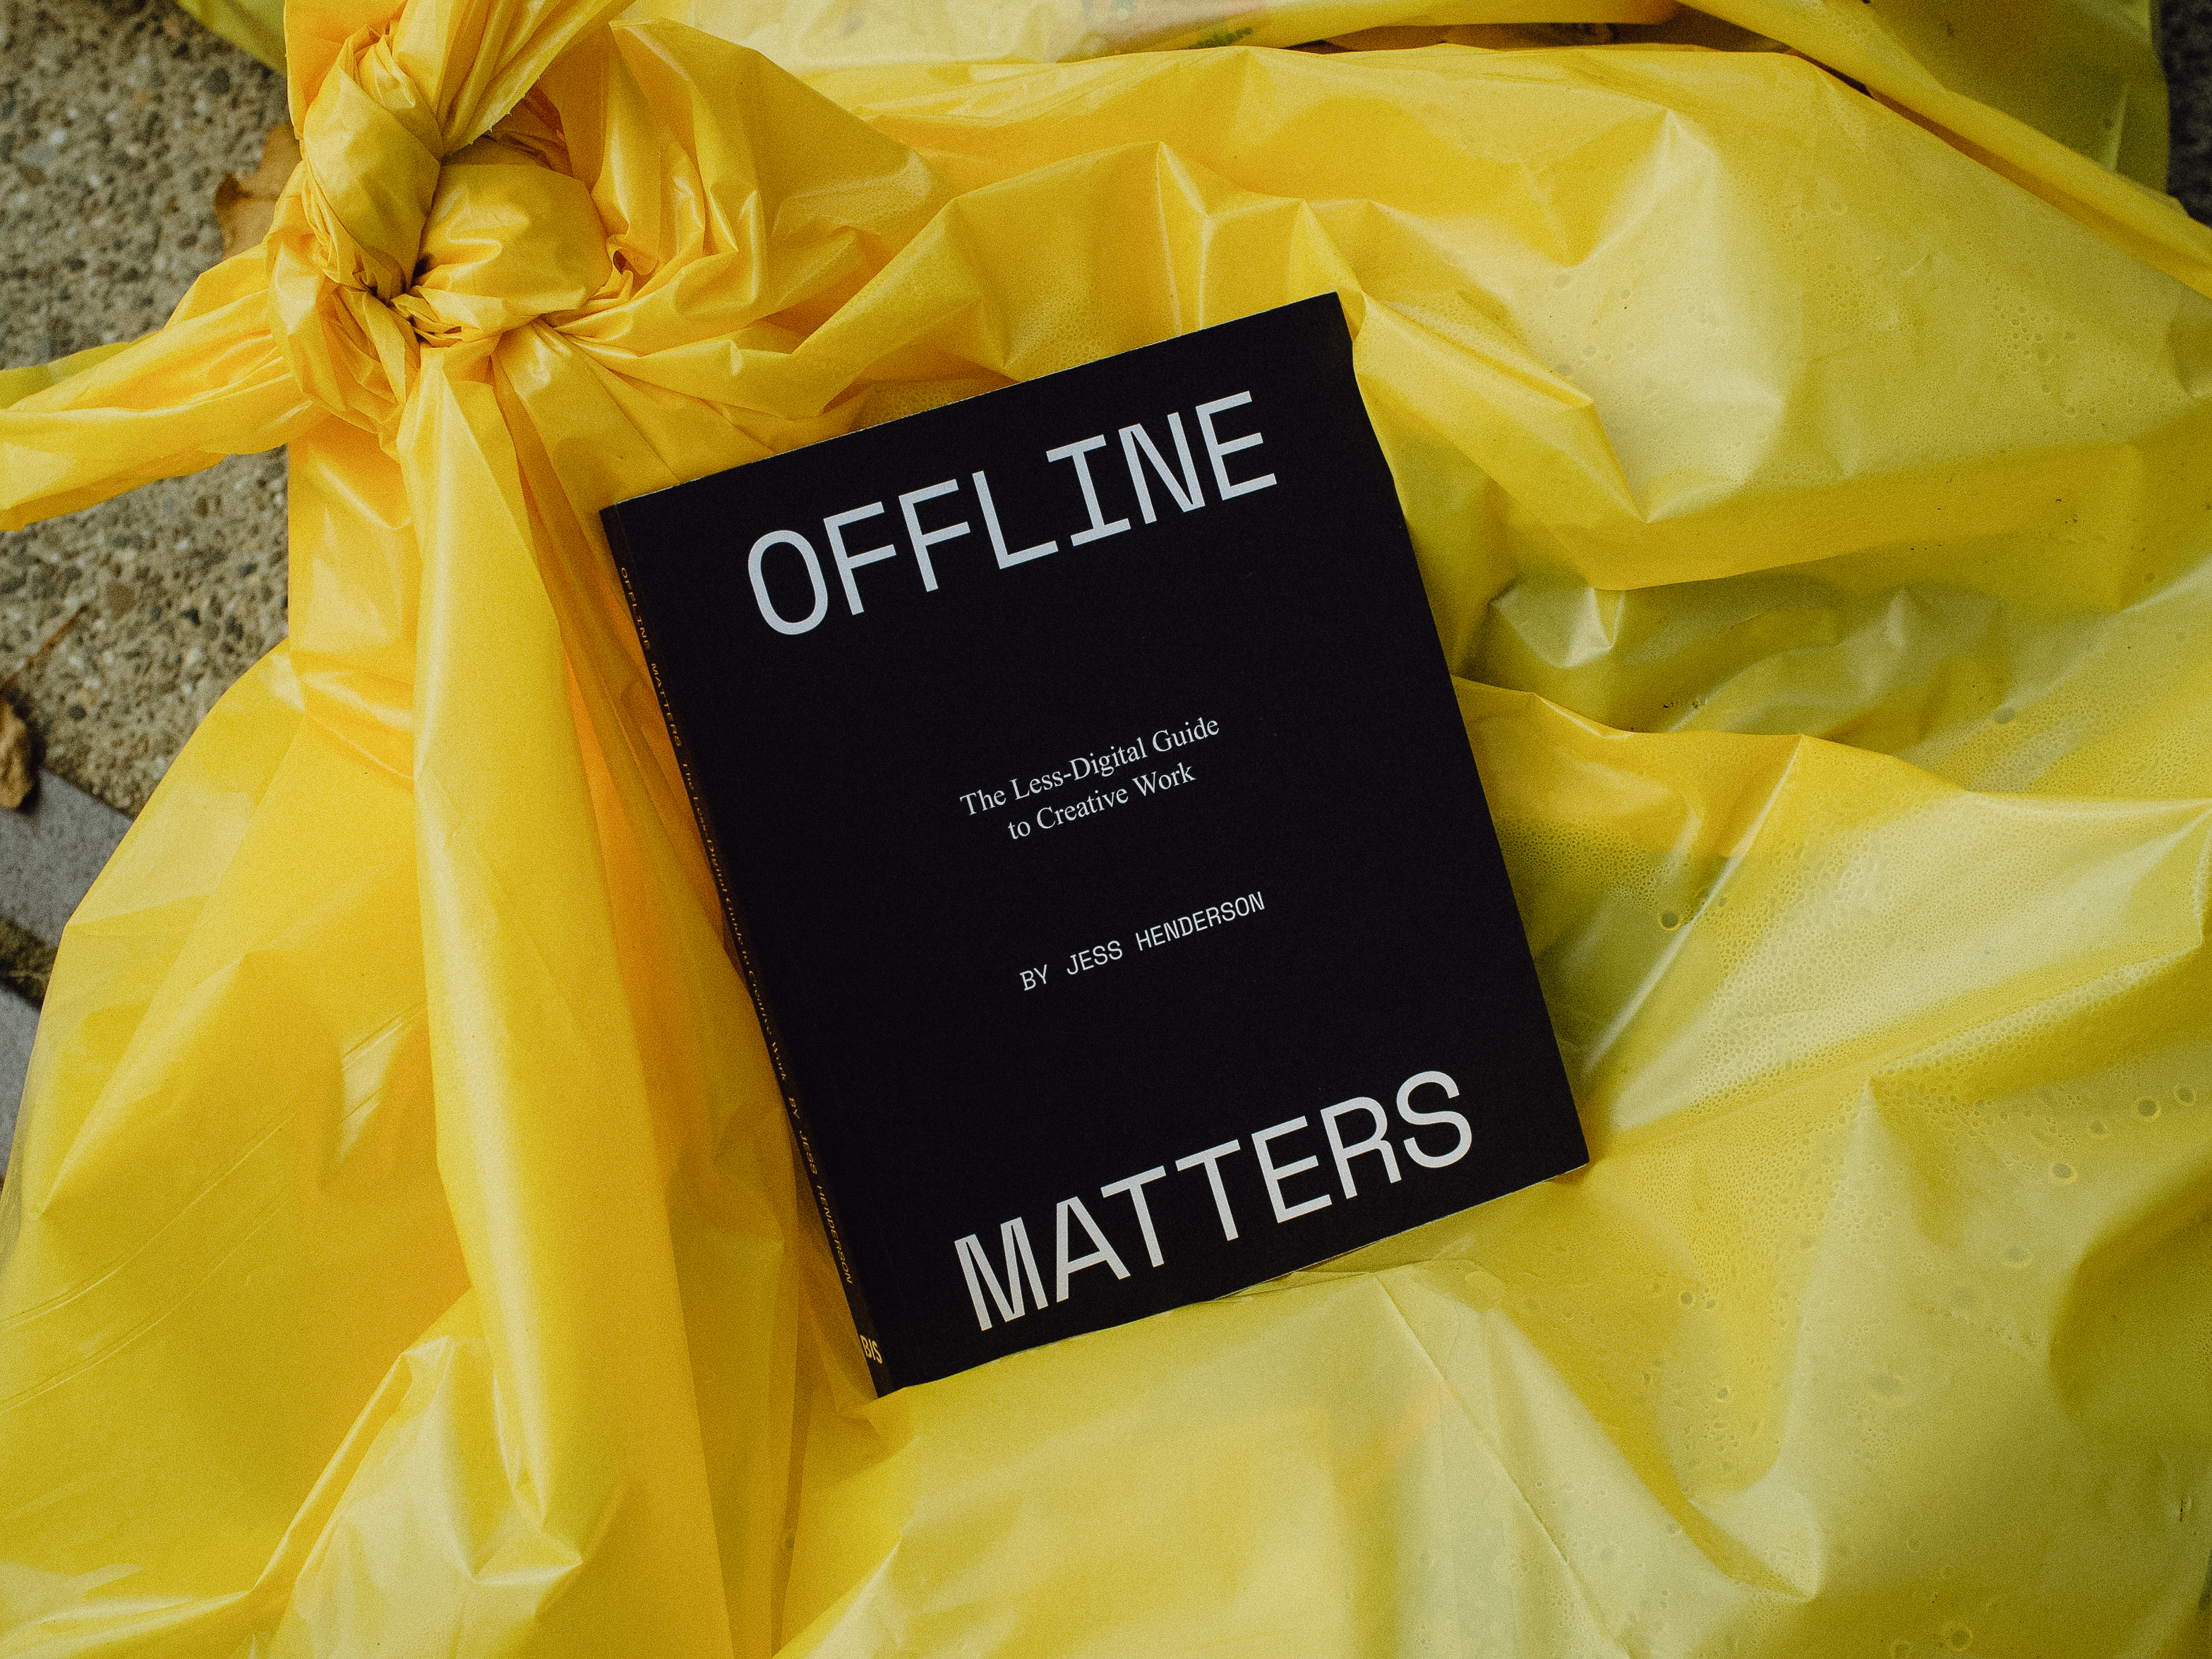 Offline Matters: The Less-Digital Guide to Creative Work by